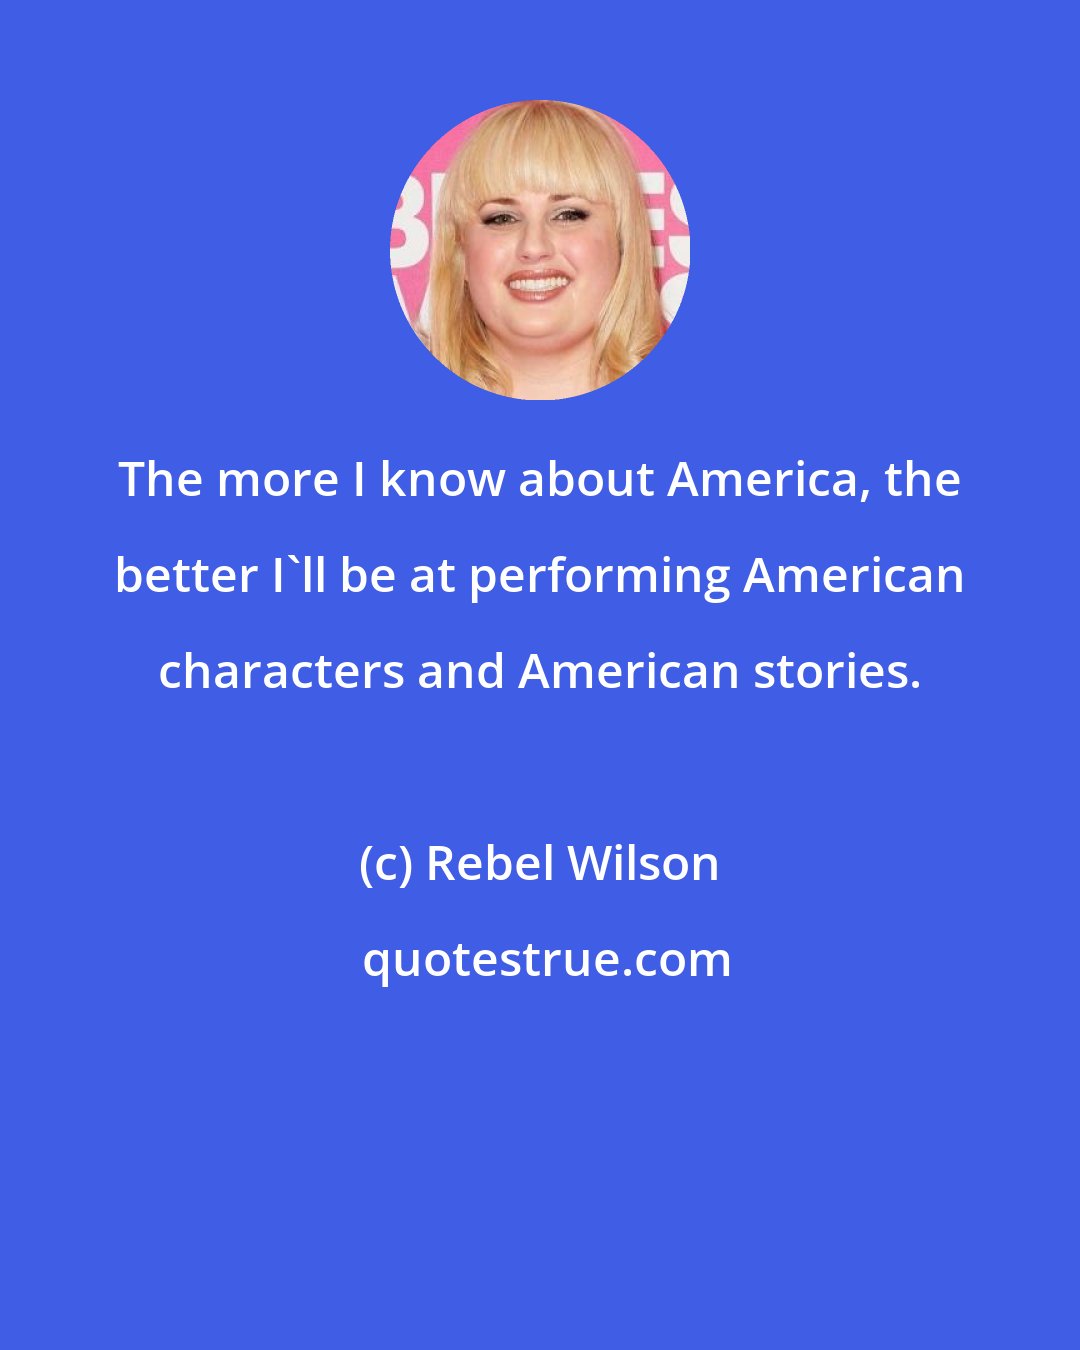 Rebel Wilson: The more I know about America, the better I'll be at performing American characters and American stories.